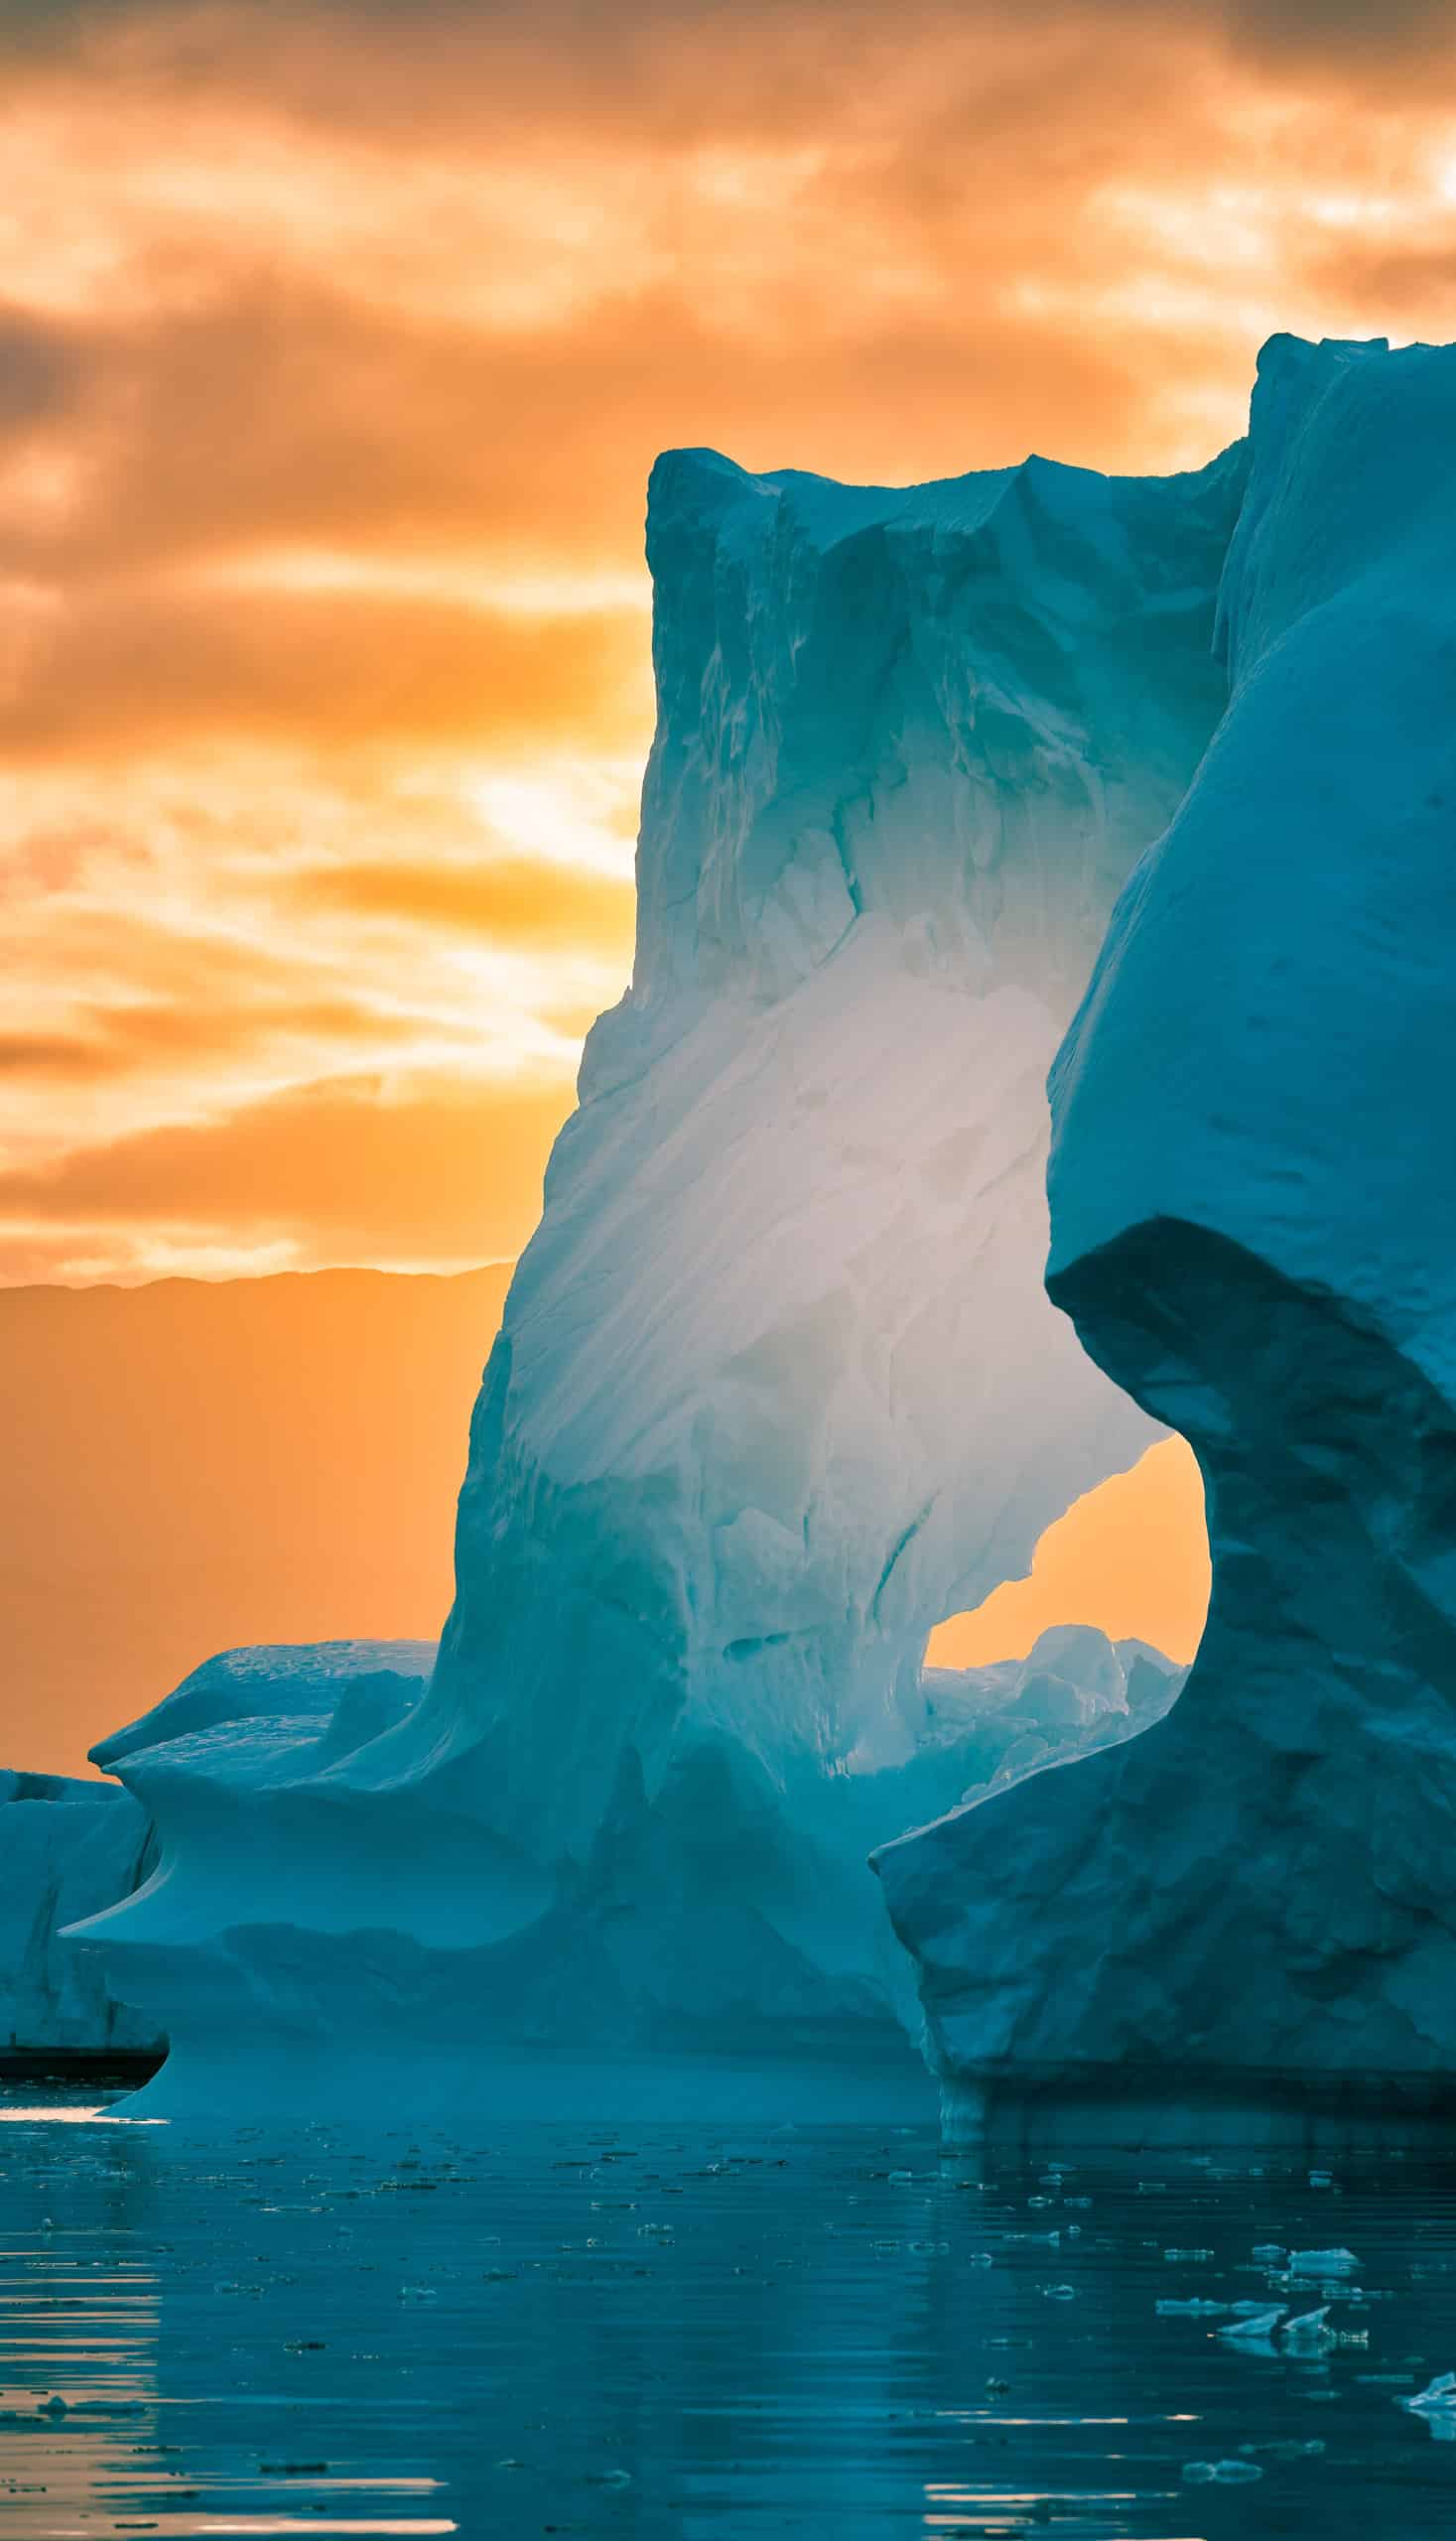 A large iceberg in Greenland.